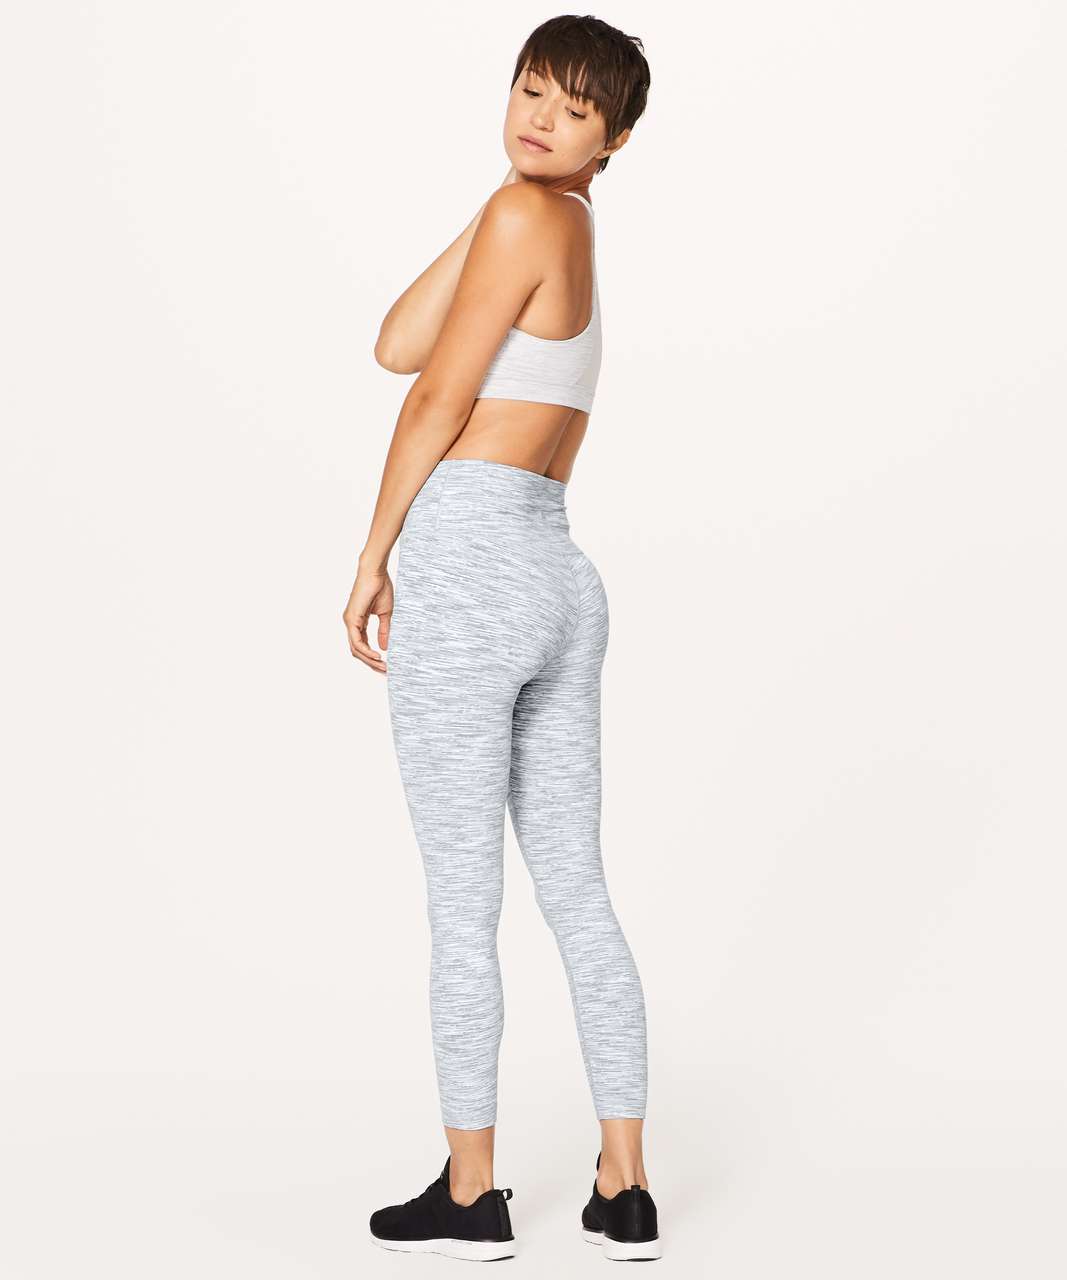 Lululemon Wunder Under Hi-Rise 7/8 Tight *25" - Wee Are From Space Ice Grey Alpine White